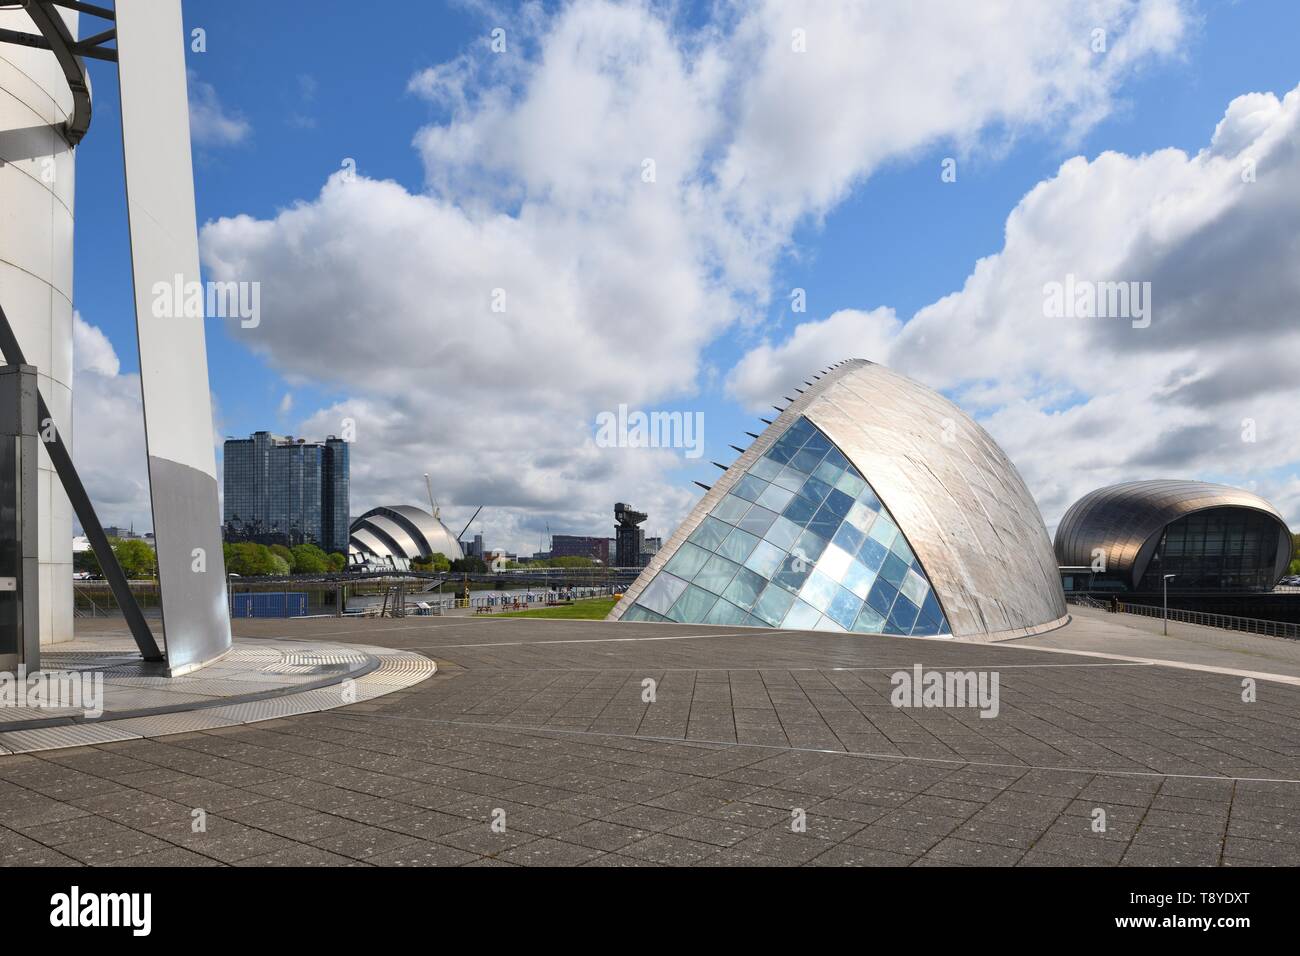 A riverside view of science centre, imax theatre, armadillo, and Finnieston crane from the bottom of the Glasgow Tower platform, in Scotland, UK Stock Photo